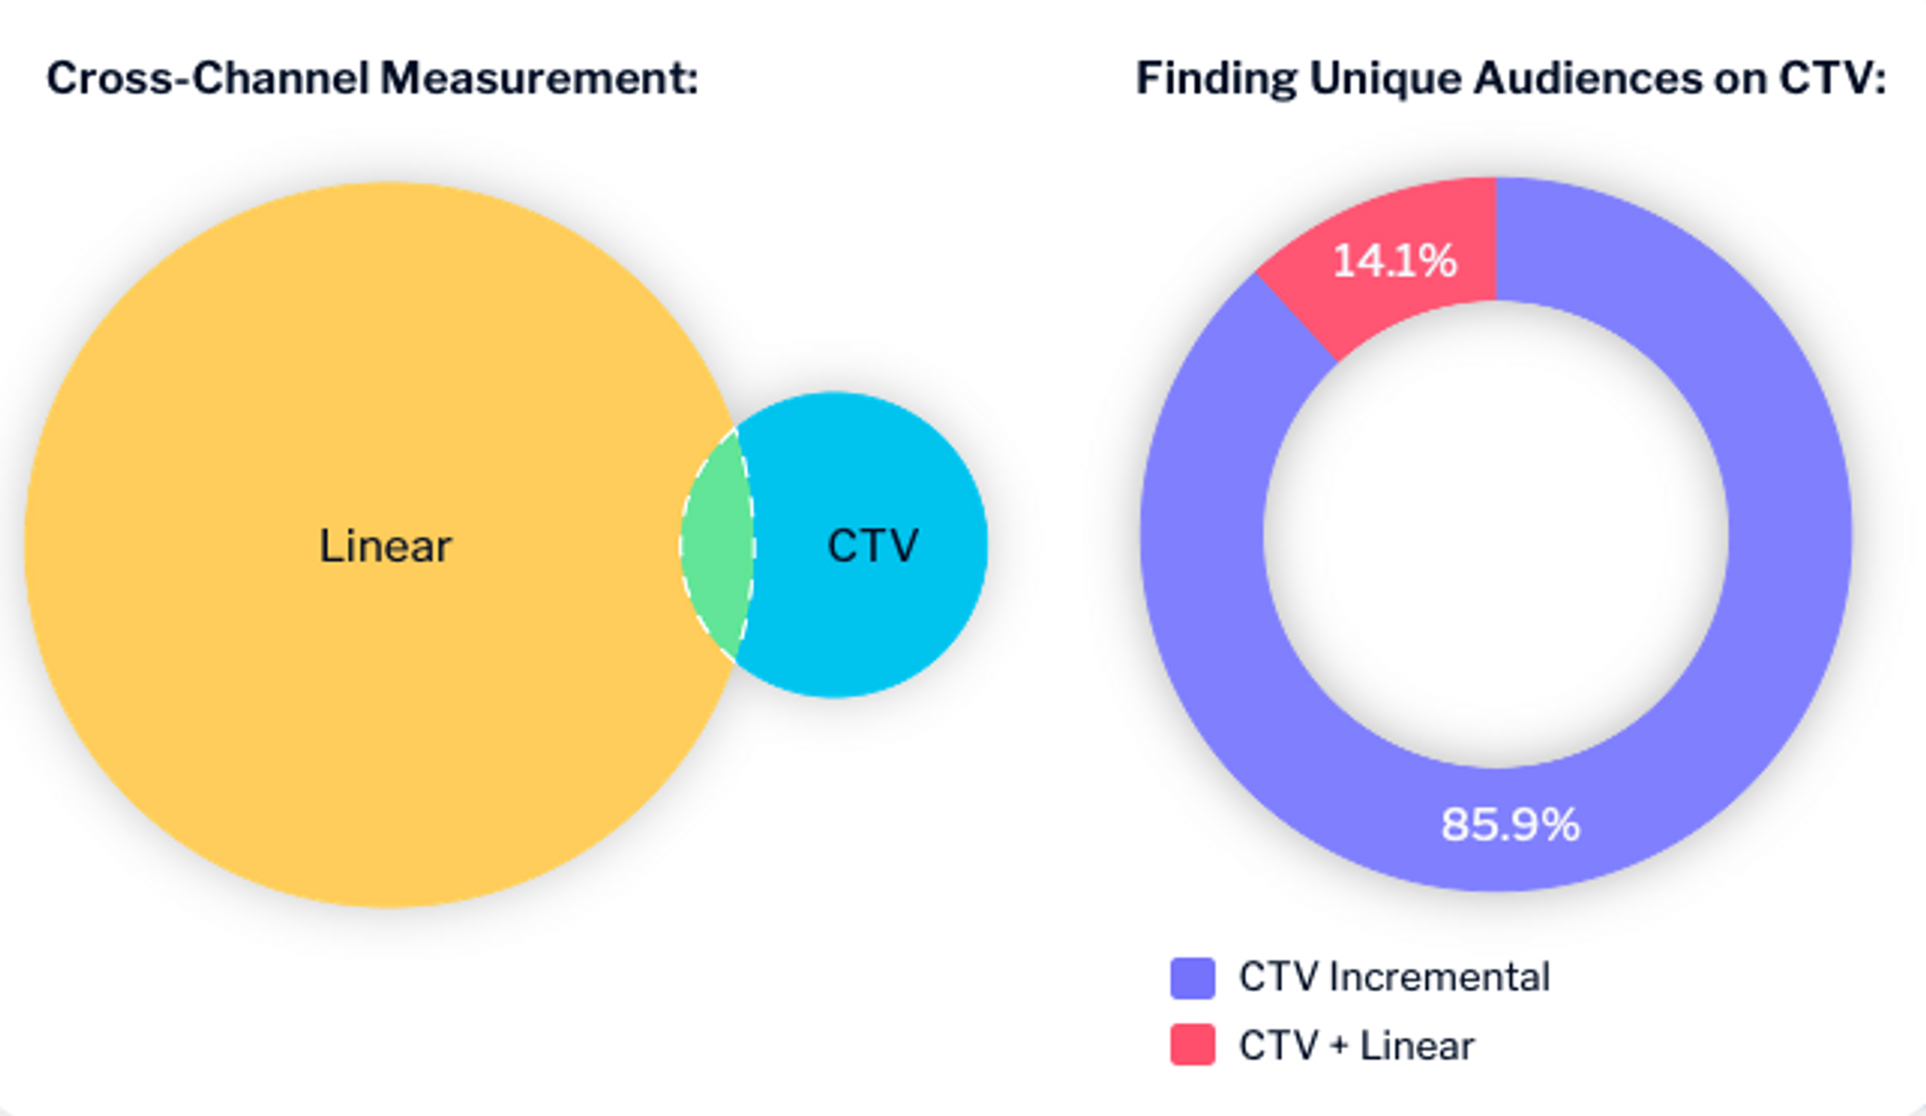 TV advertising case study bar chart showing cross-channel measurement and unique audiences on CTV